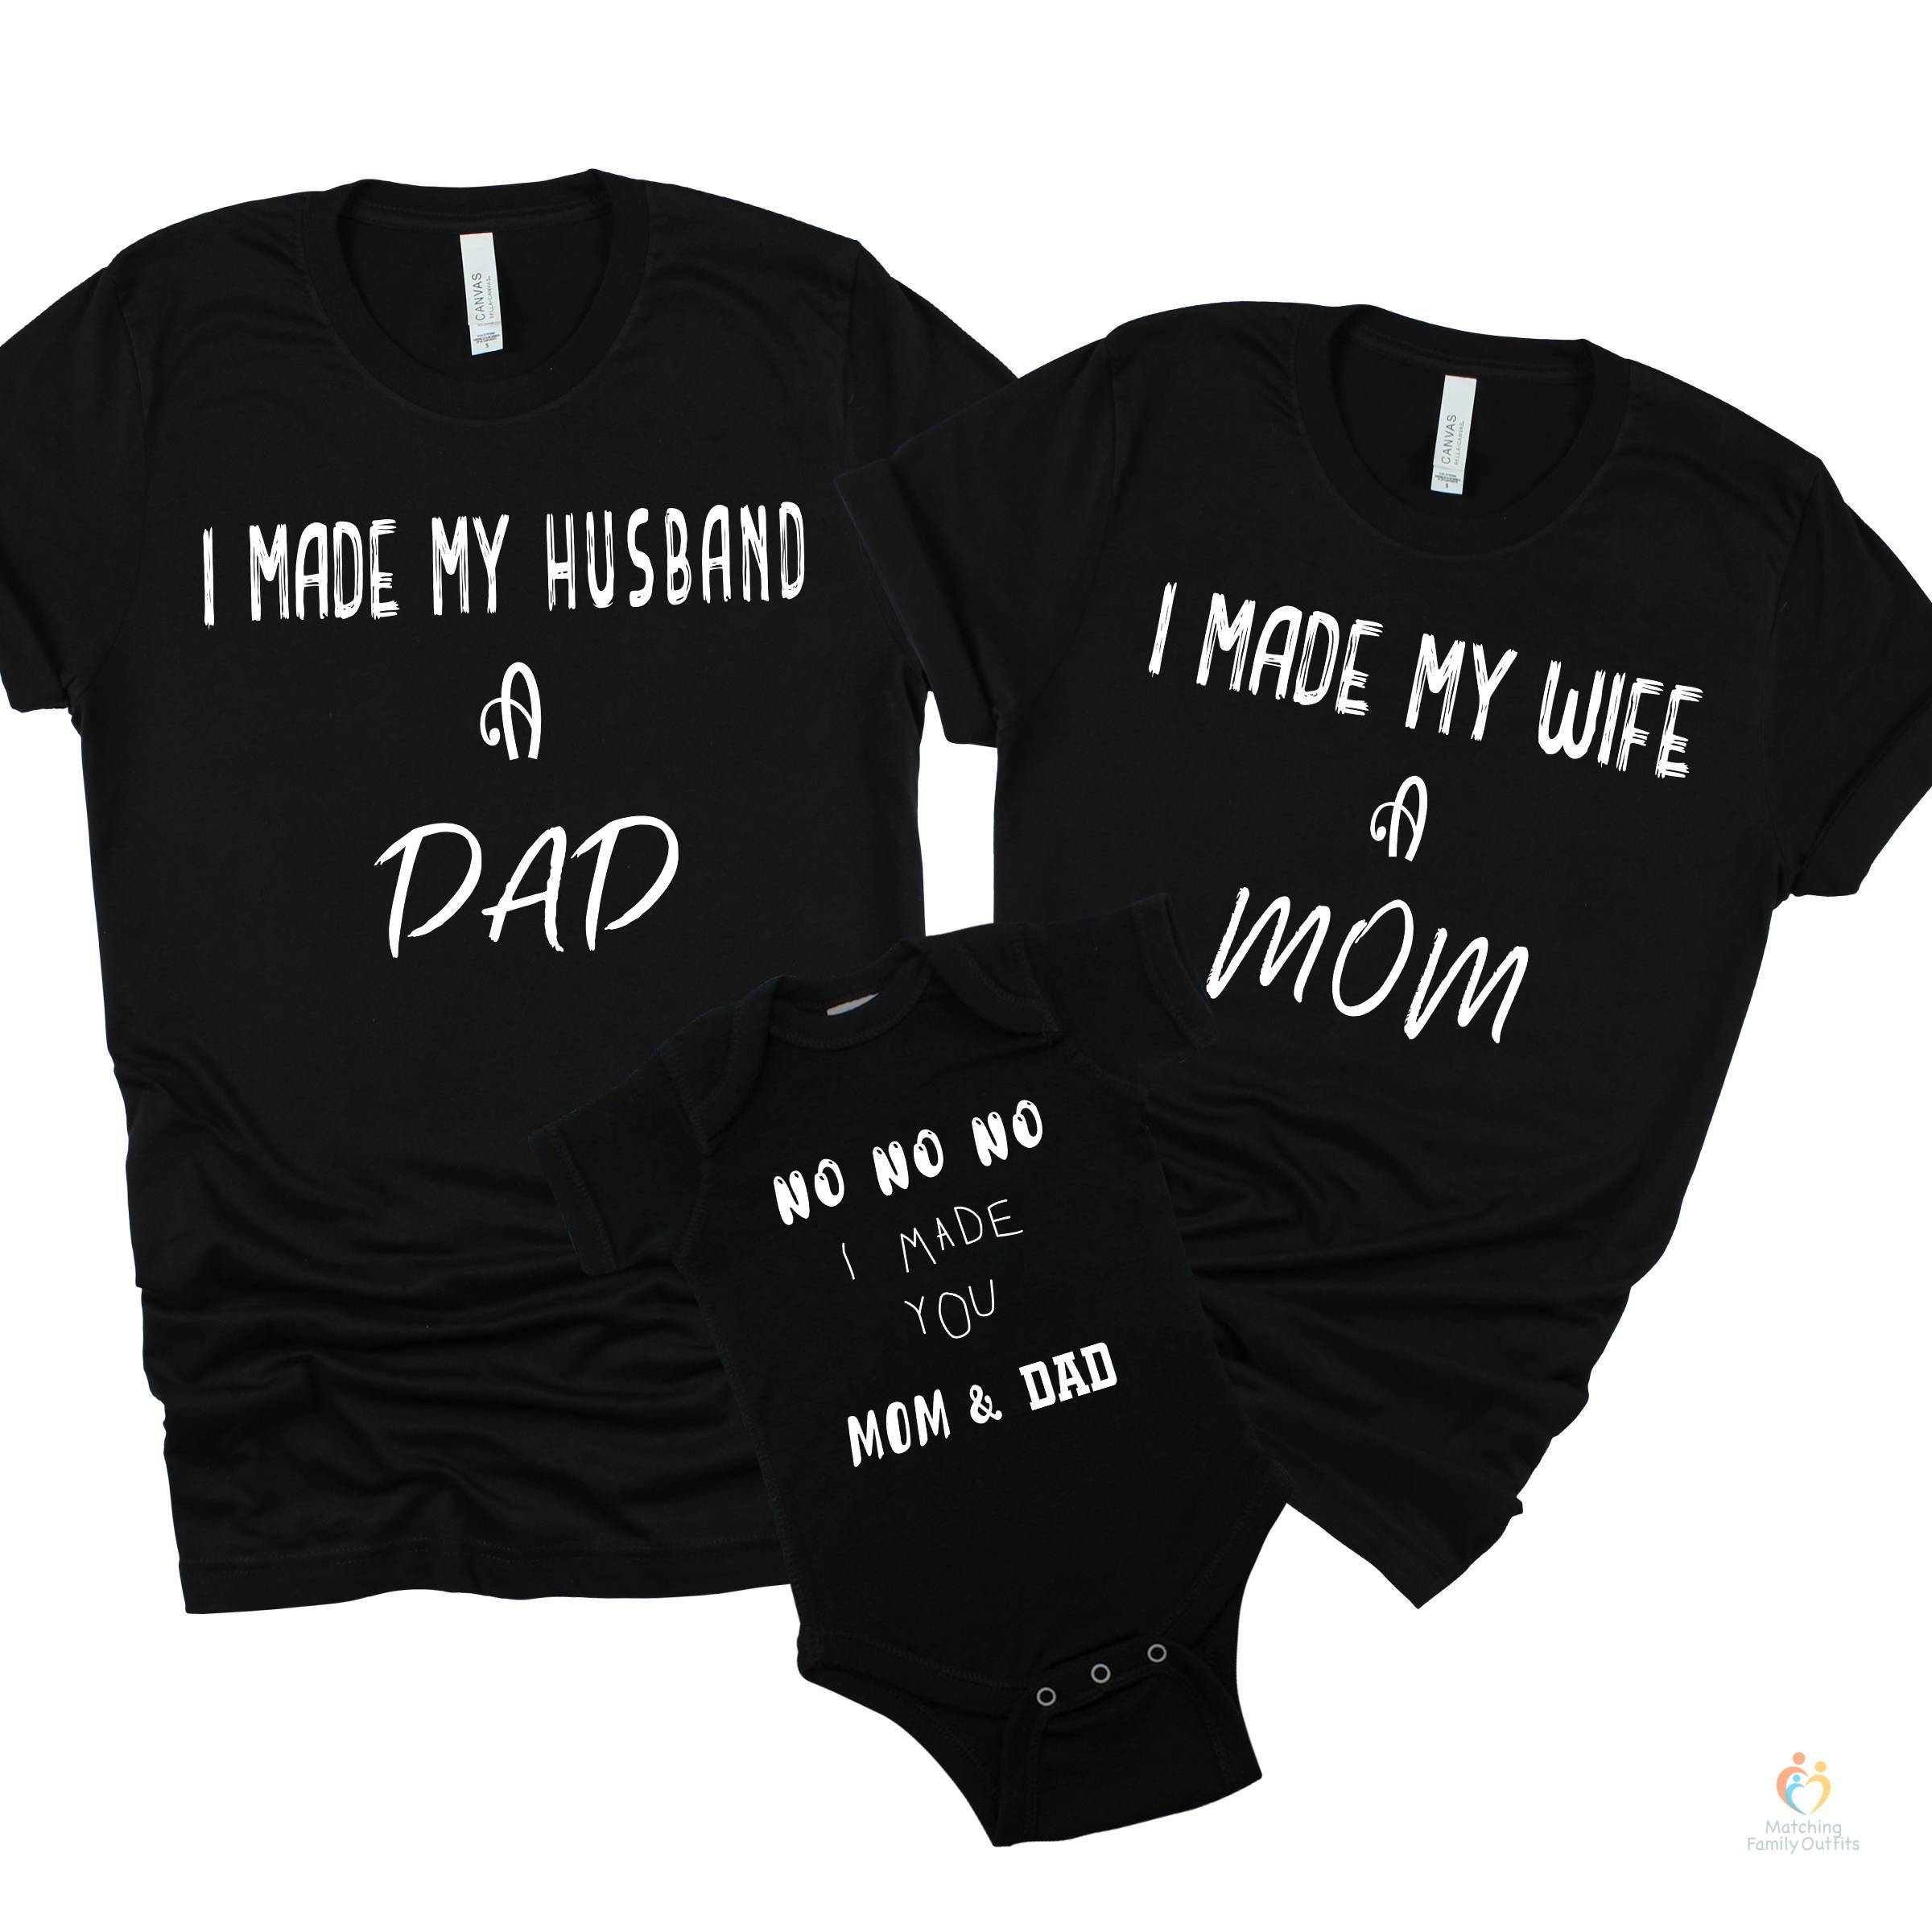 Mom and Dad Pregnancy Announcement T-shirts